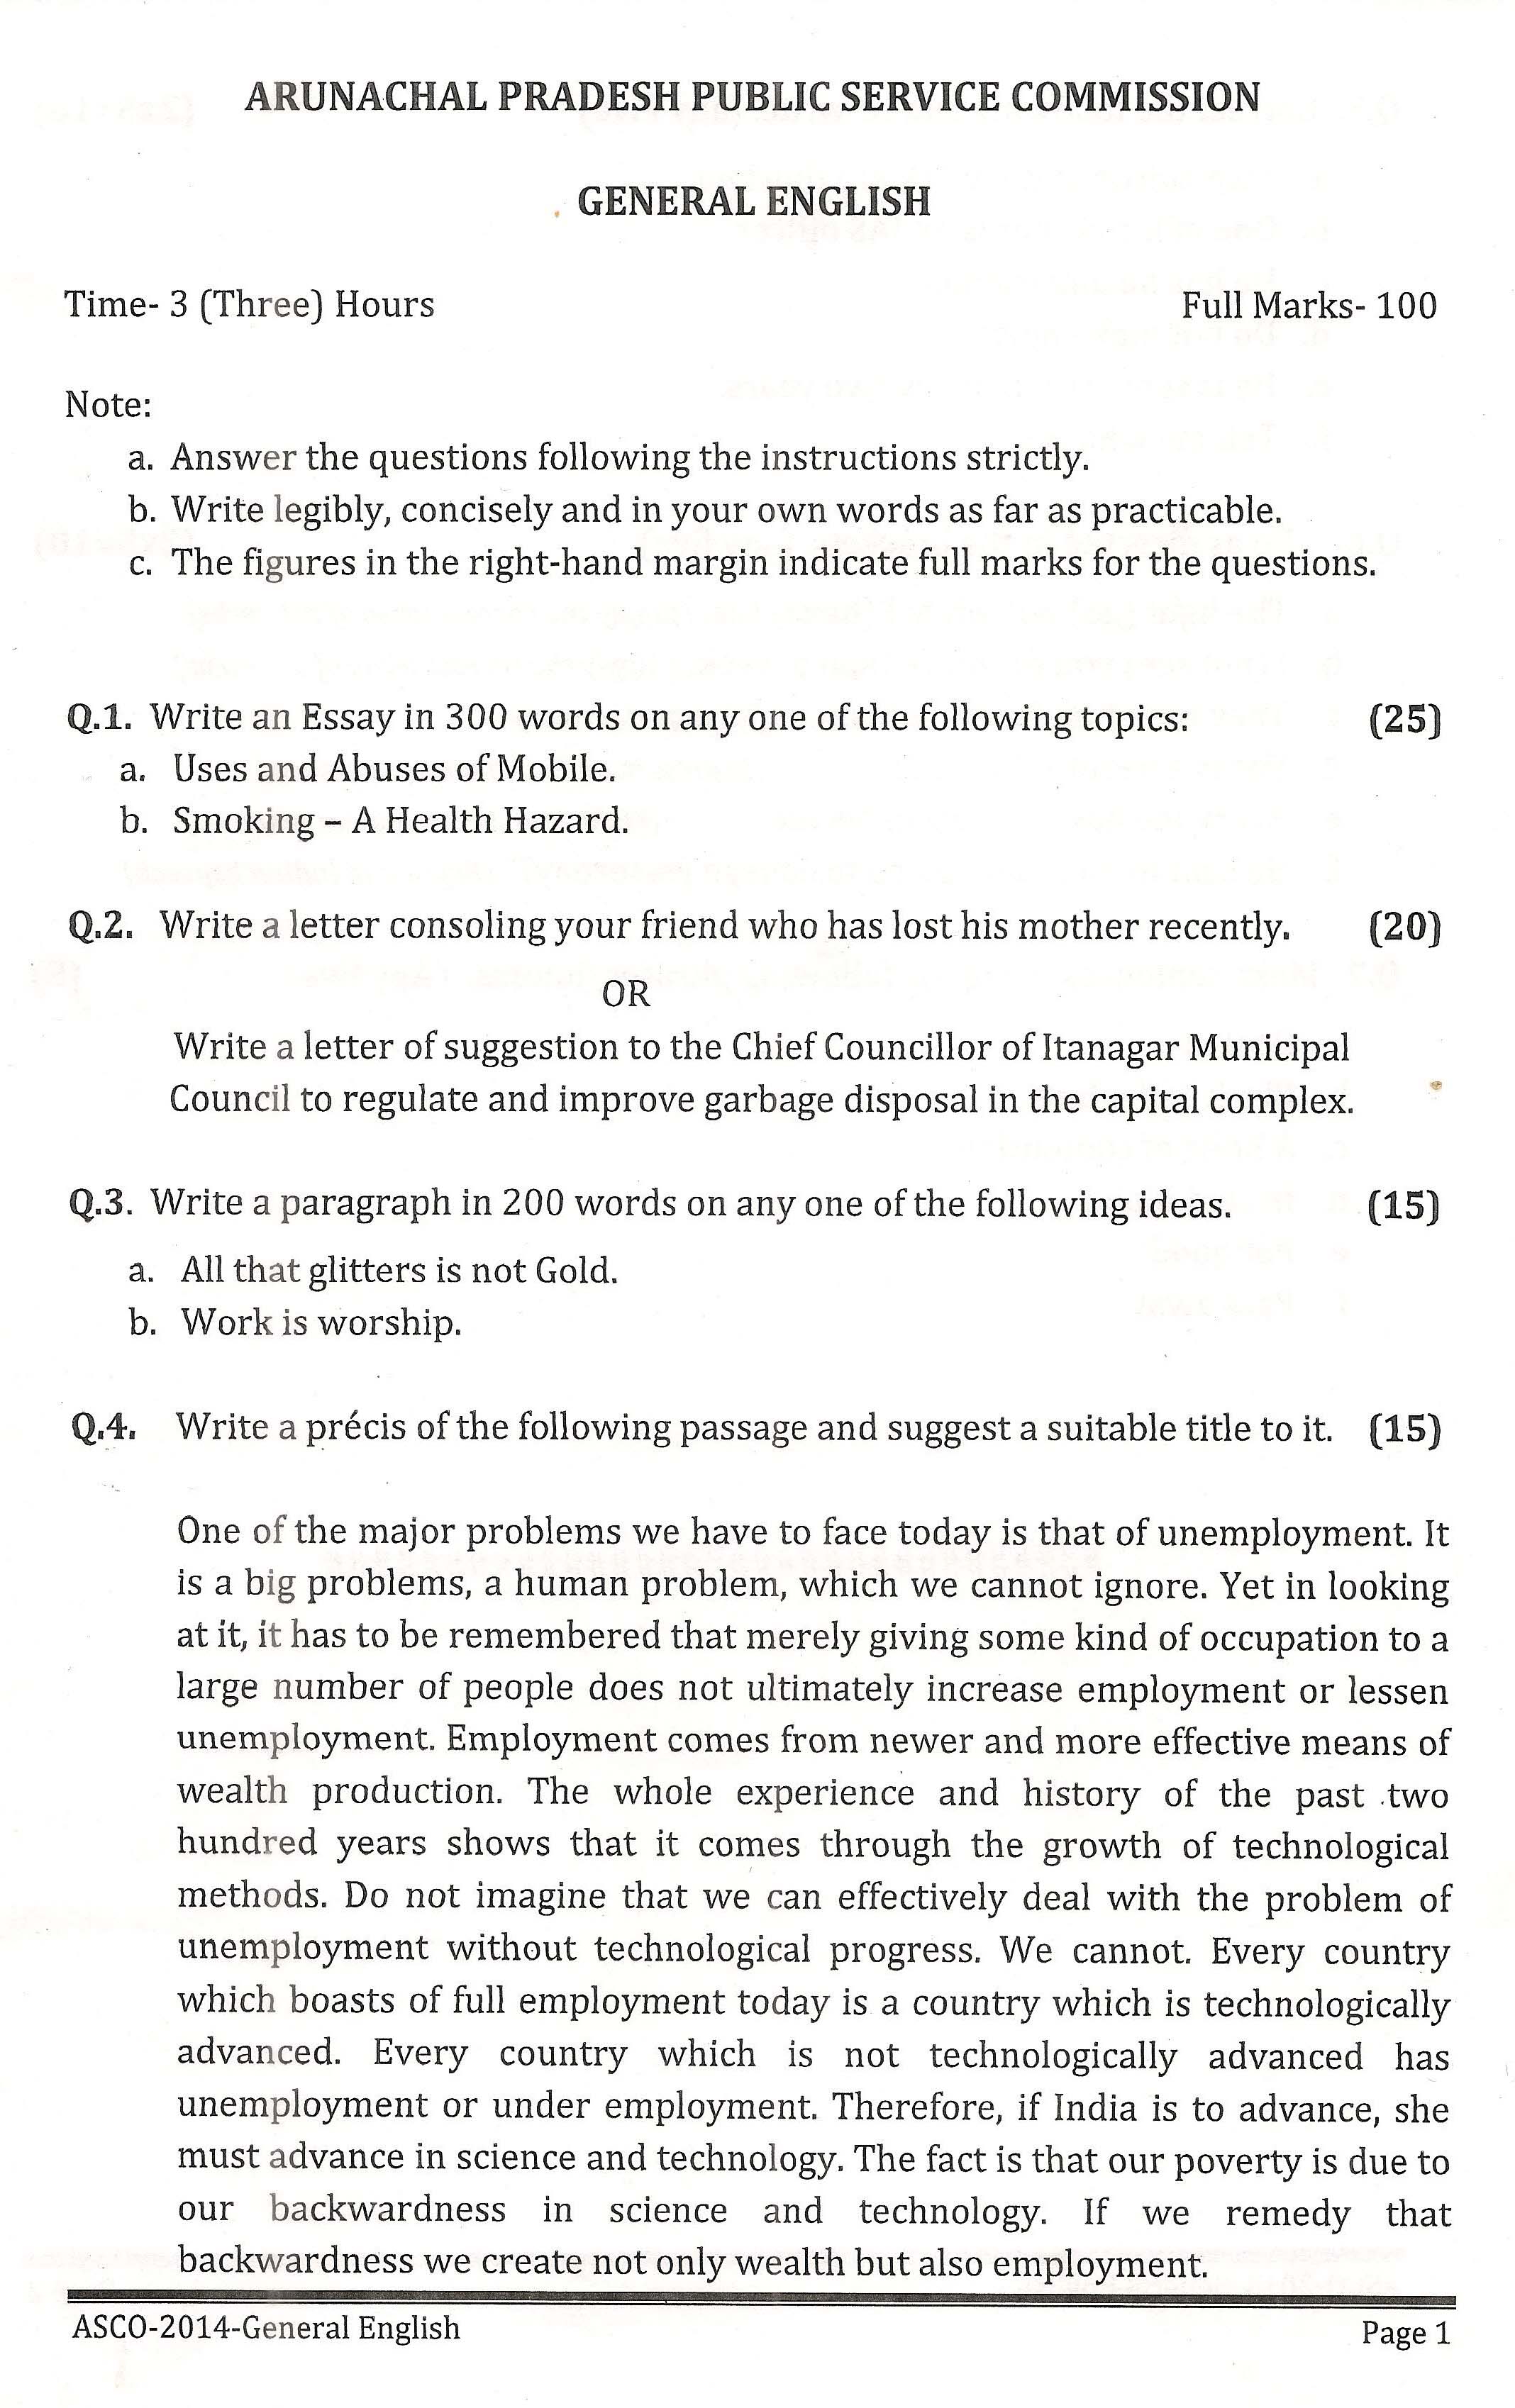 APPSC ASCO General English Exam Question Paper 2014 1